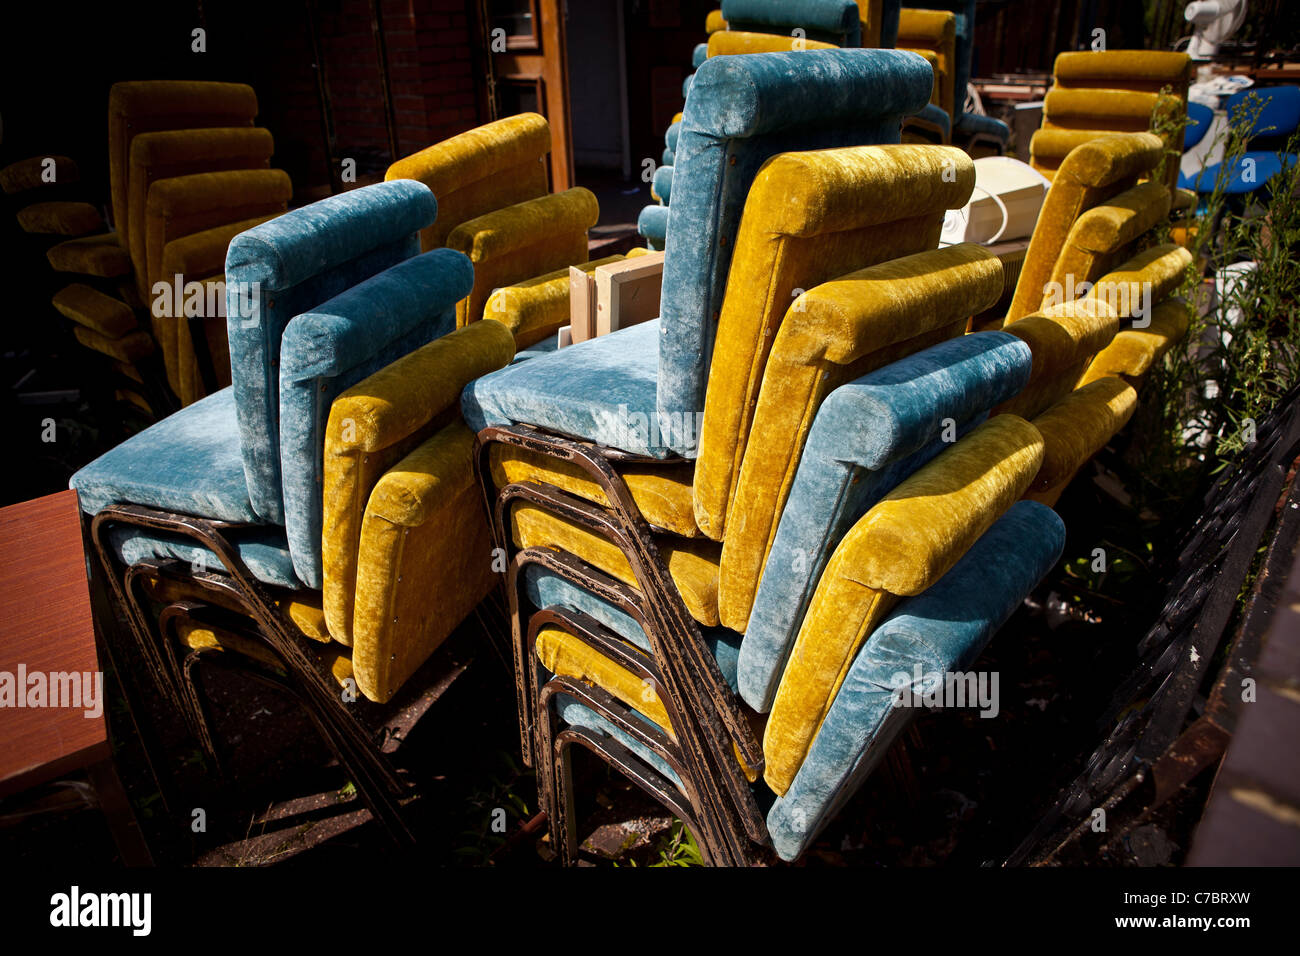 Stacks of crushed velvet blue and green coloured chairs. Stock Photo